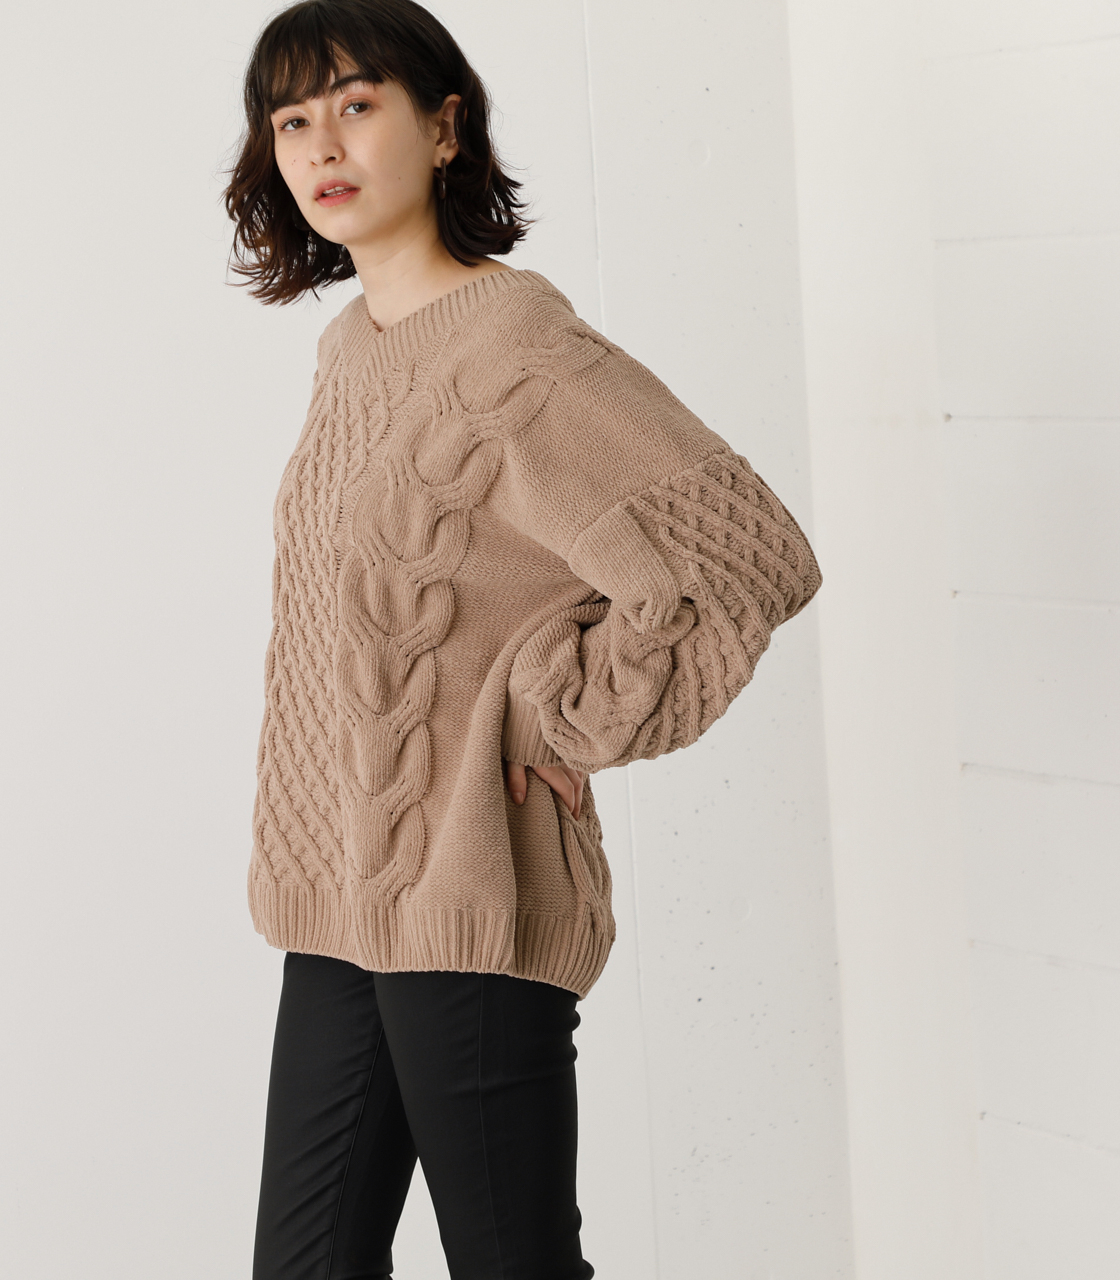 CHENILLE CABLE V/N KNIT TOPS/シェニールケーブルVネックニットトップス 詳細画像 BEG 1